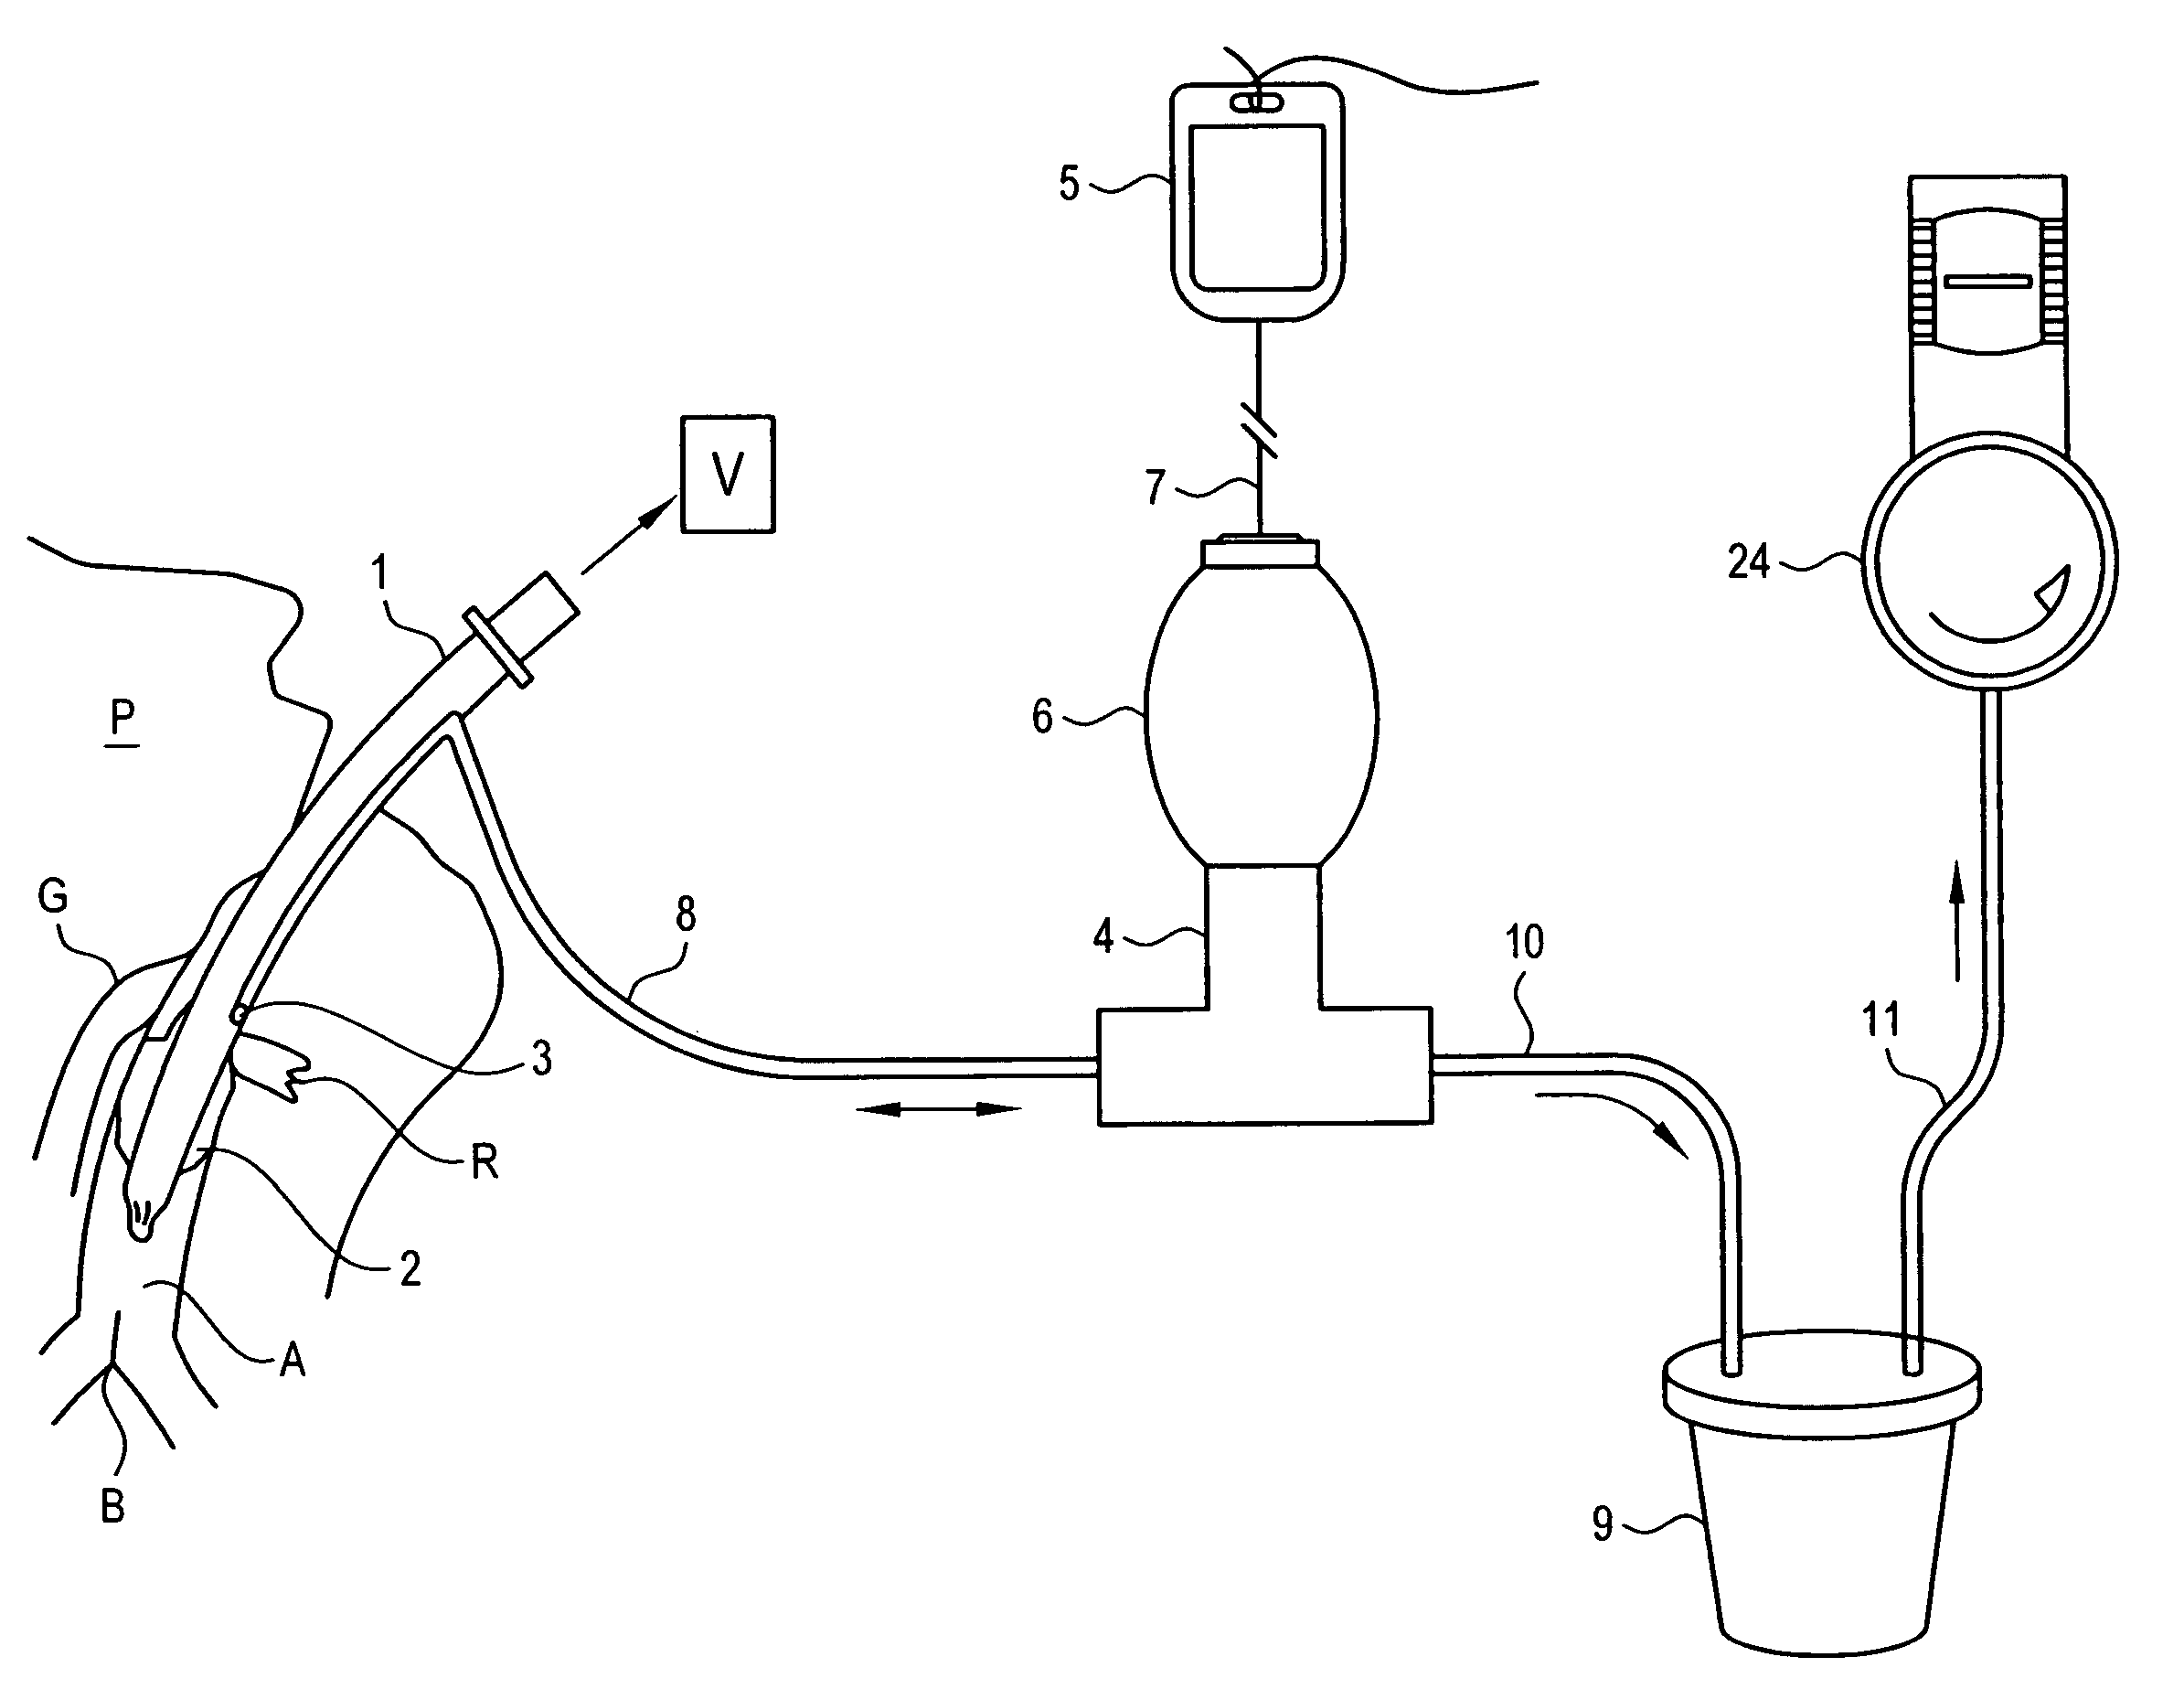 Apparatus for vacuum-assisted irrigation and drainage of a body cavity